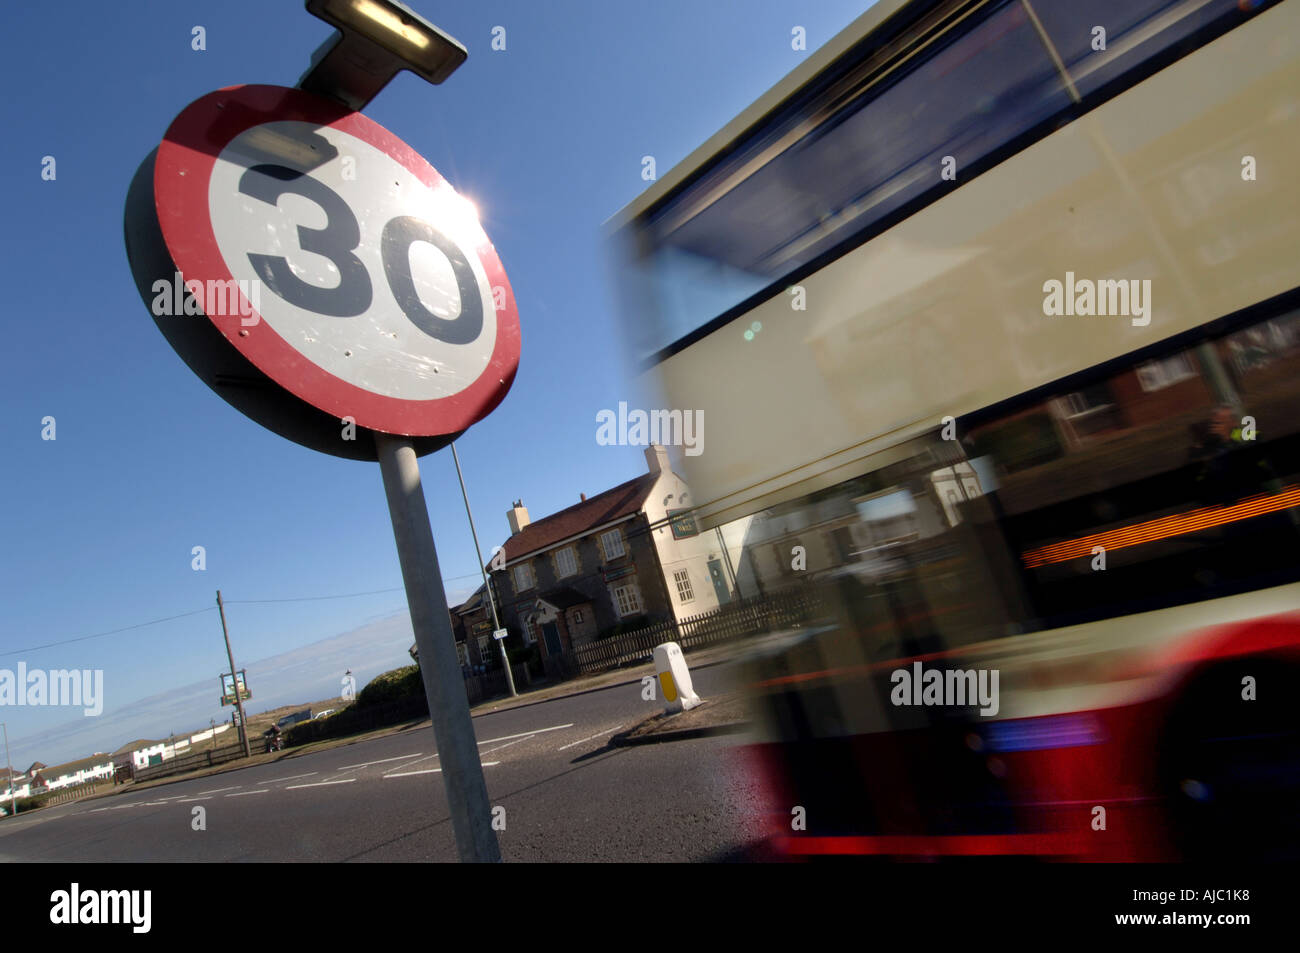 a-clear-road-ahead-for-a-bus-in-a-30mph-